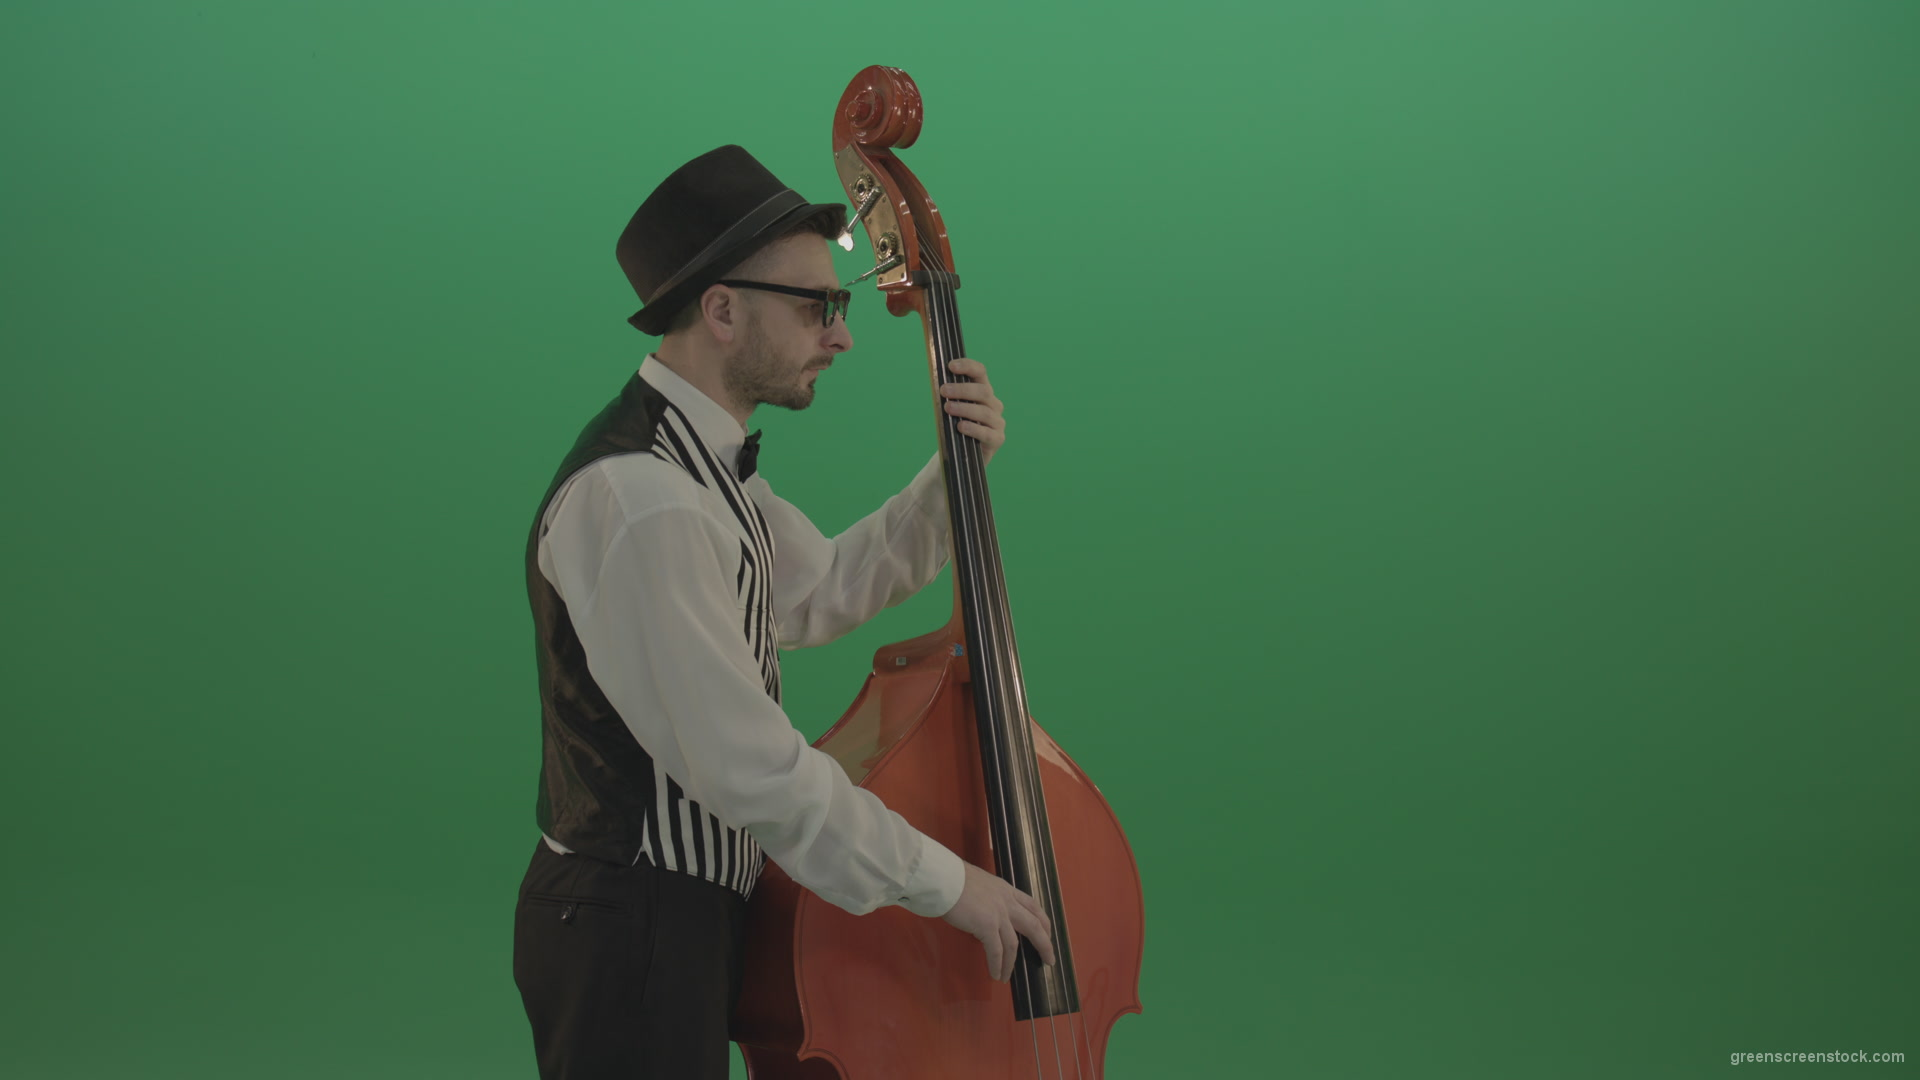 Young-Man-play-jazz-on-double-bass-String-music-instrument-isolated-on-green-screen-in-back-side-view_001 Green Screen Stock